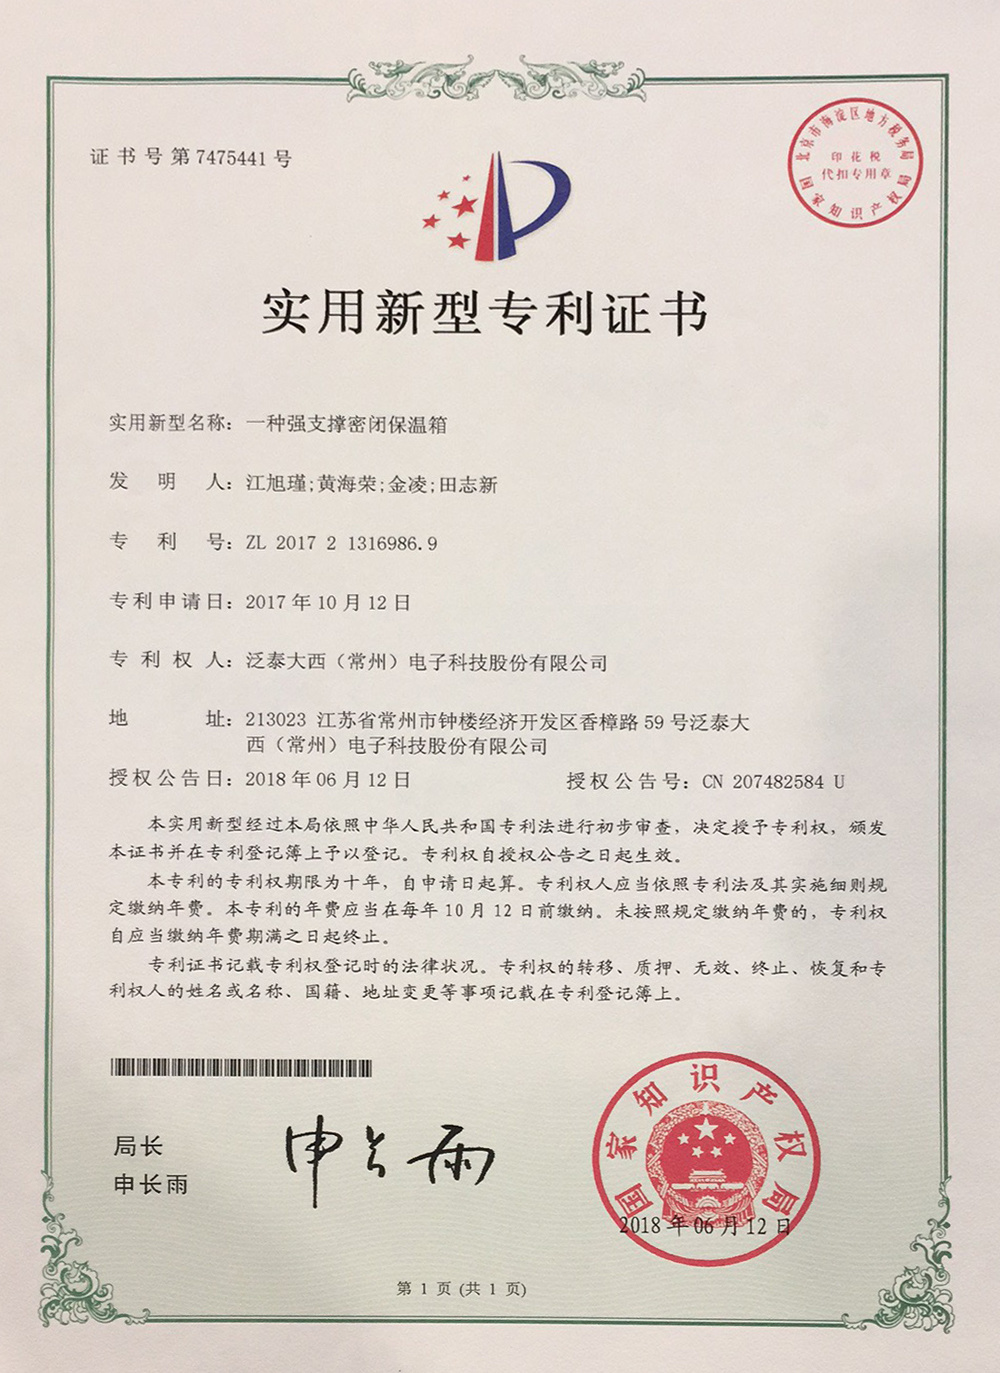 Patent certificate for strong support sealed incubator